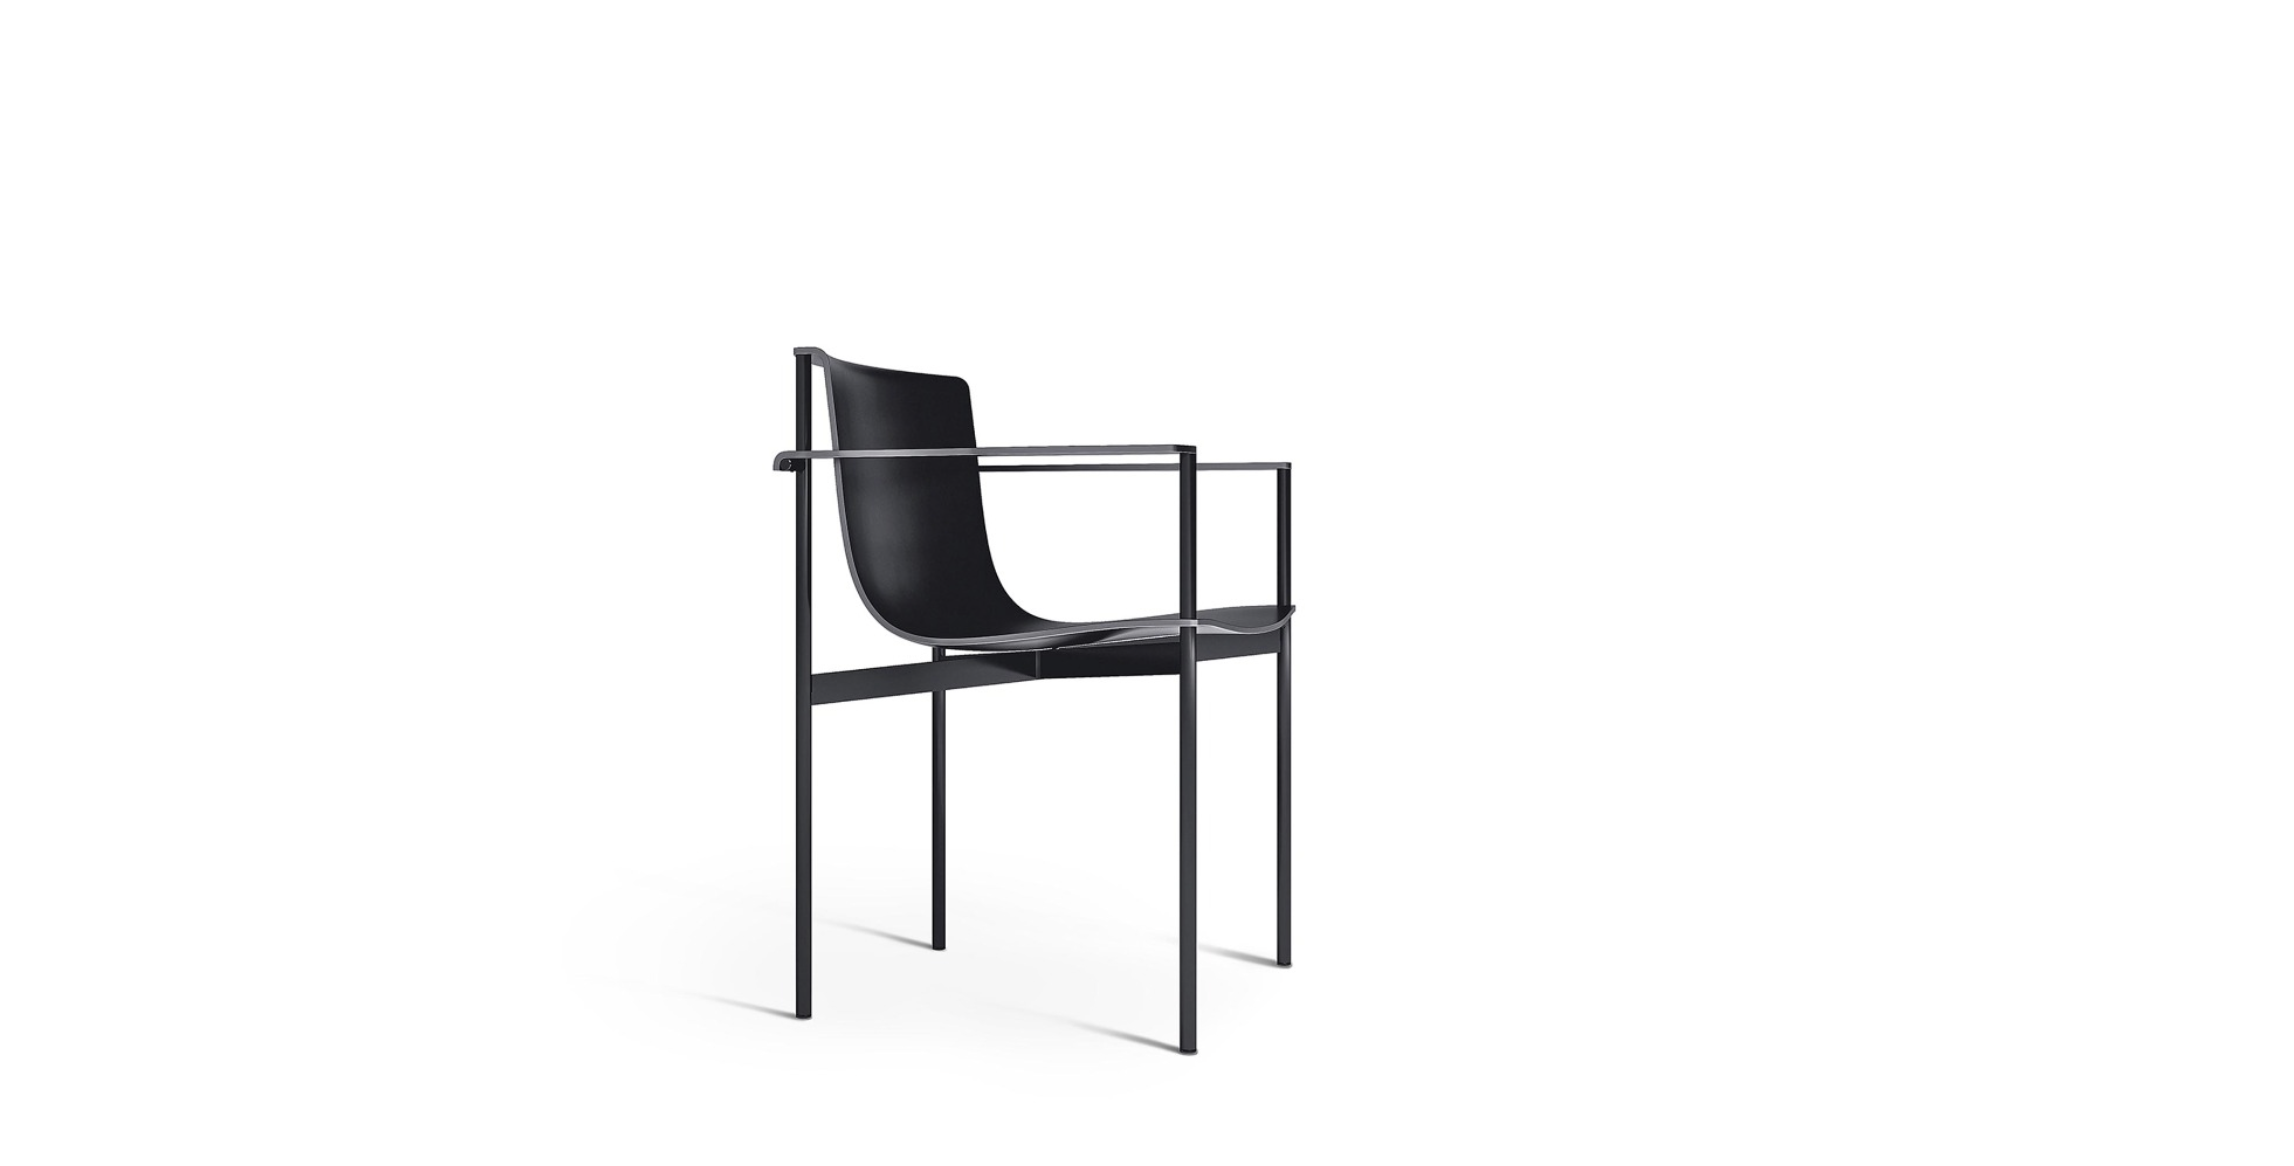 Ombra chair